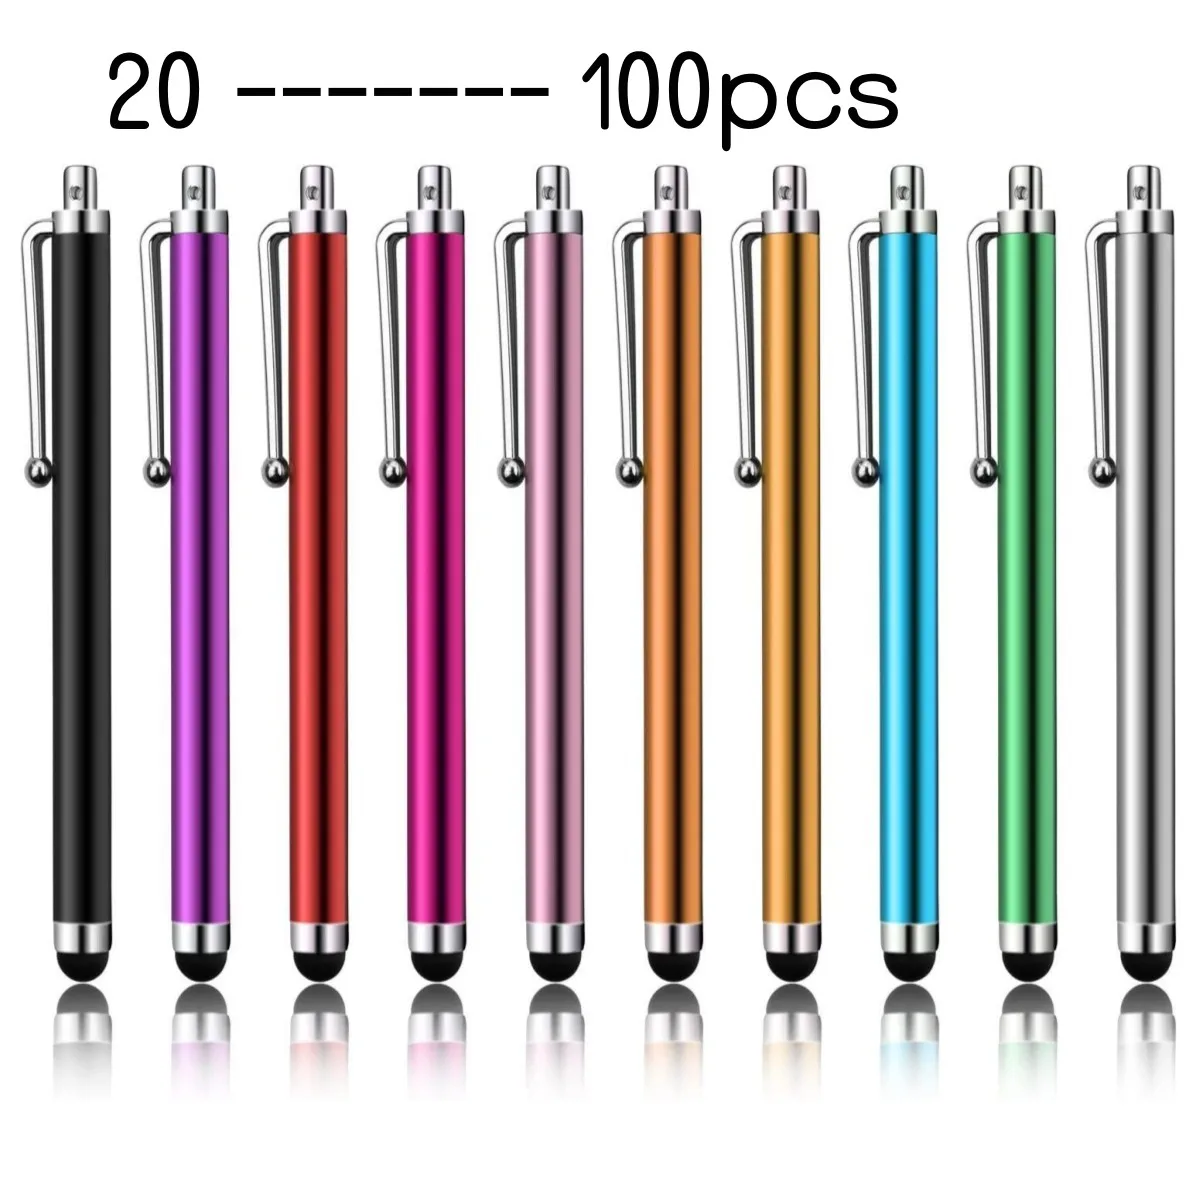 

20-100Pcs 9.0 Metal Capactive Stylus Pen Touch Screen Pens for iPad iPhone Samsung Tablet PC Smart Phone Pen